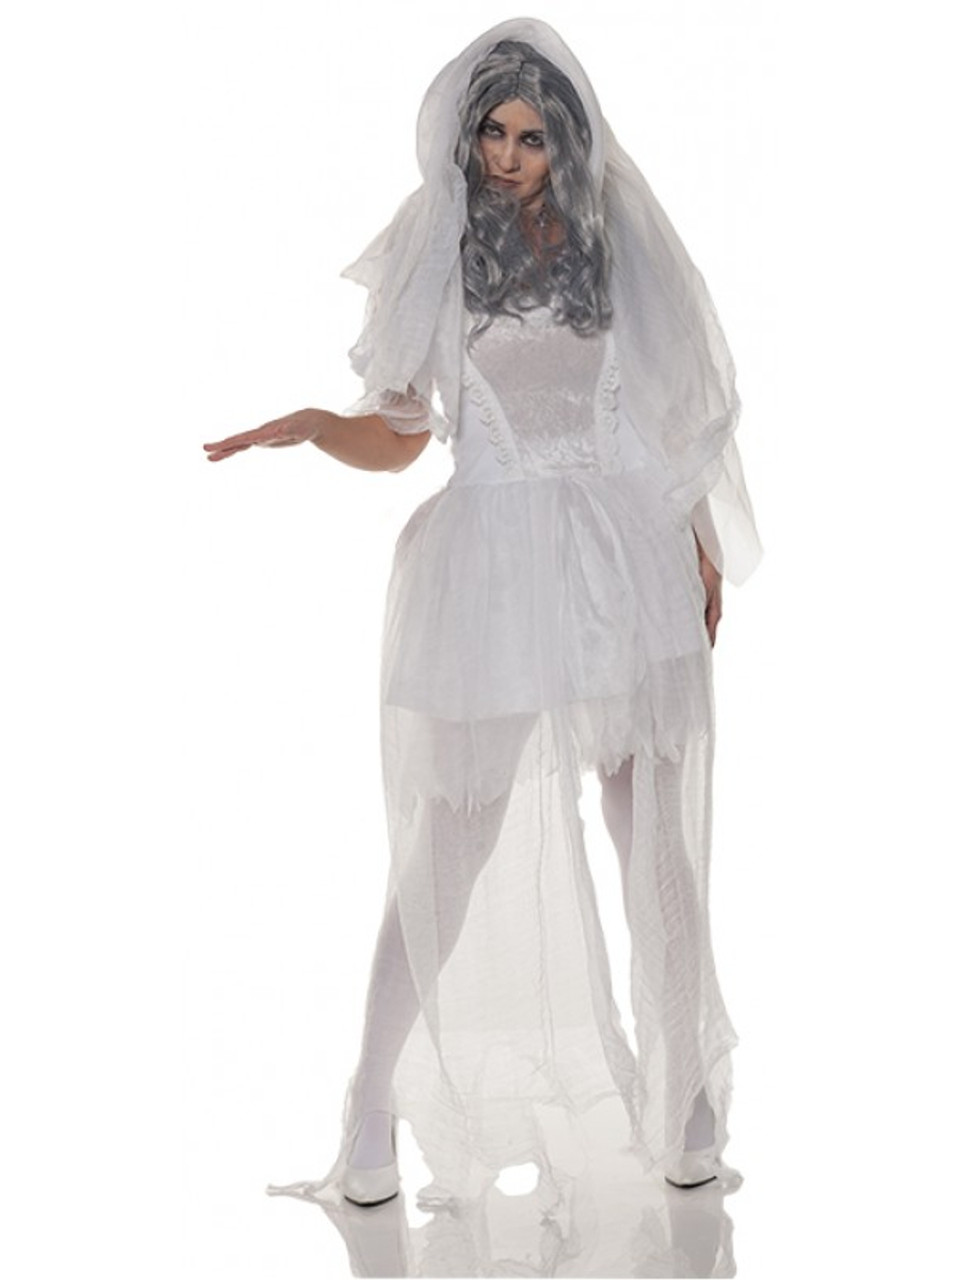 Women's Ghostly Glow Bride Costume